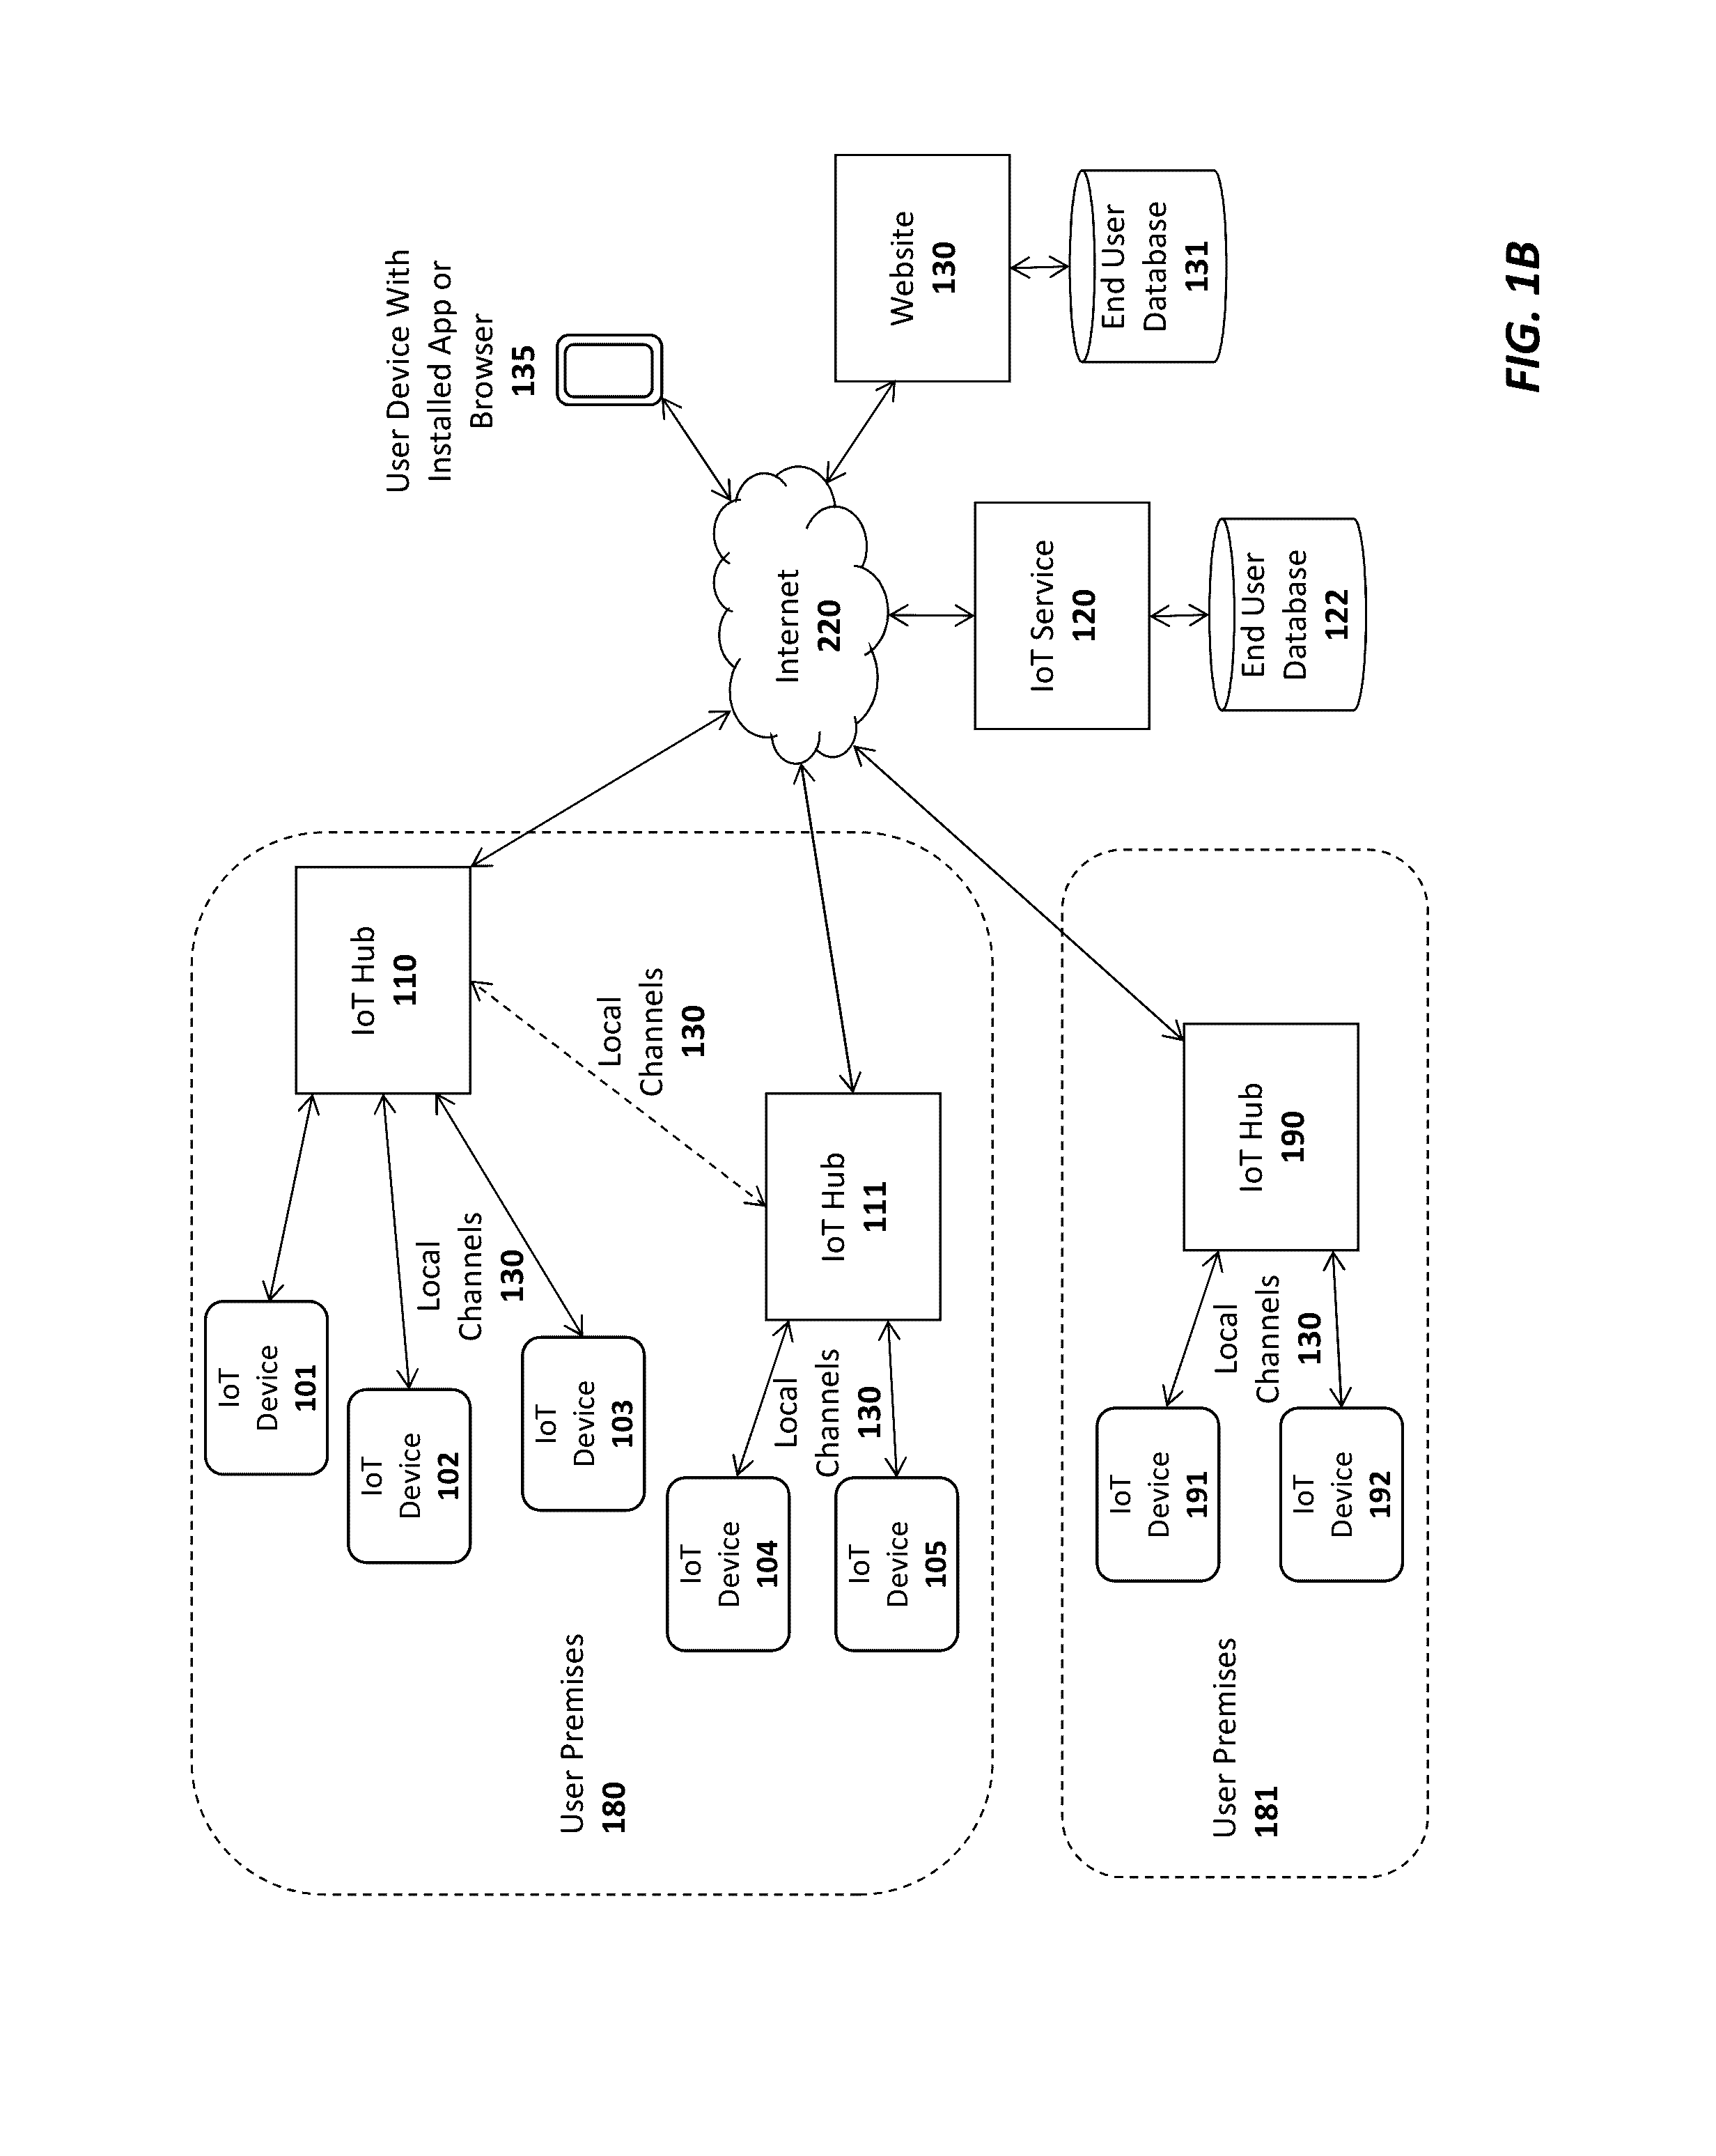 Apparatus and method for establishing secure communication channels in an internet of things (IOT) system